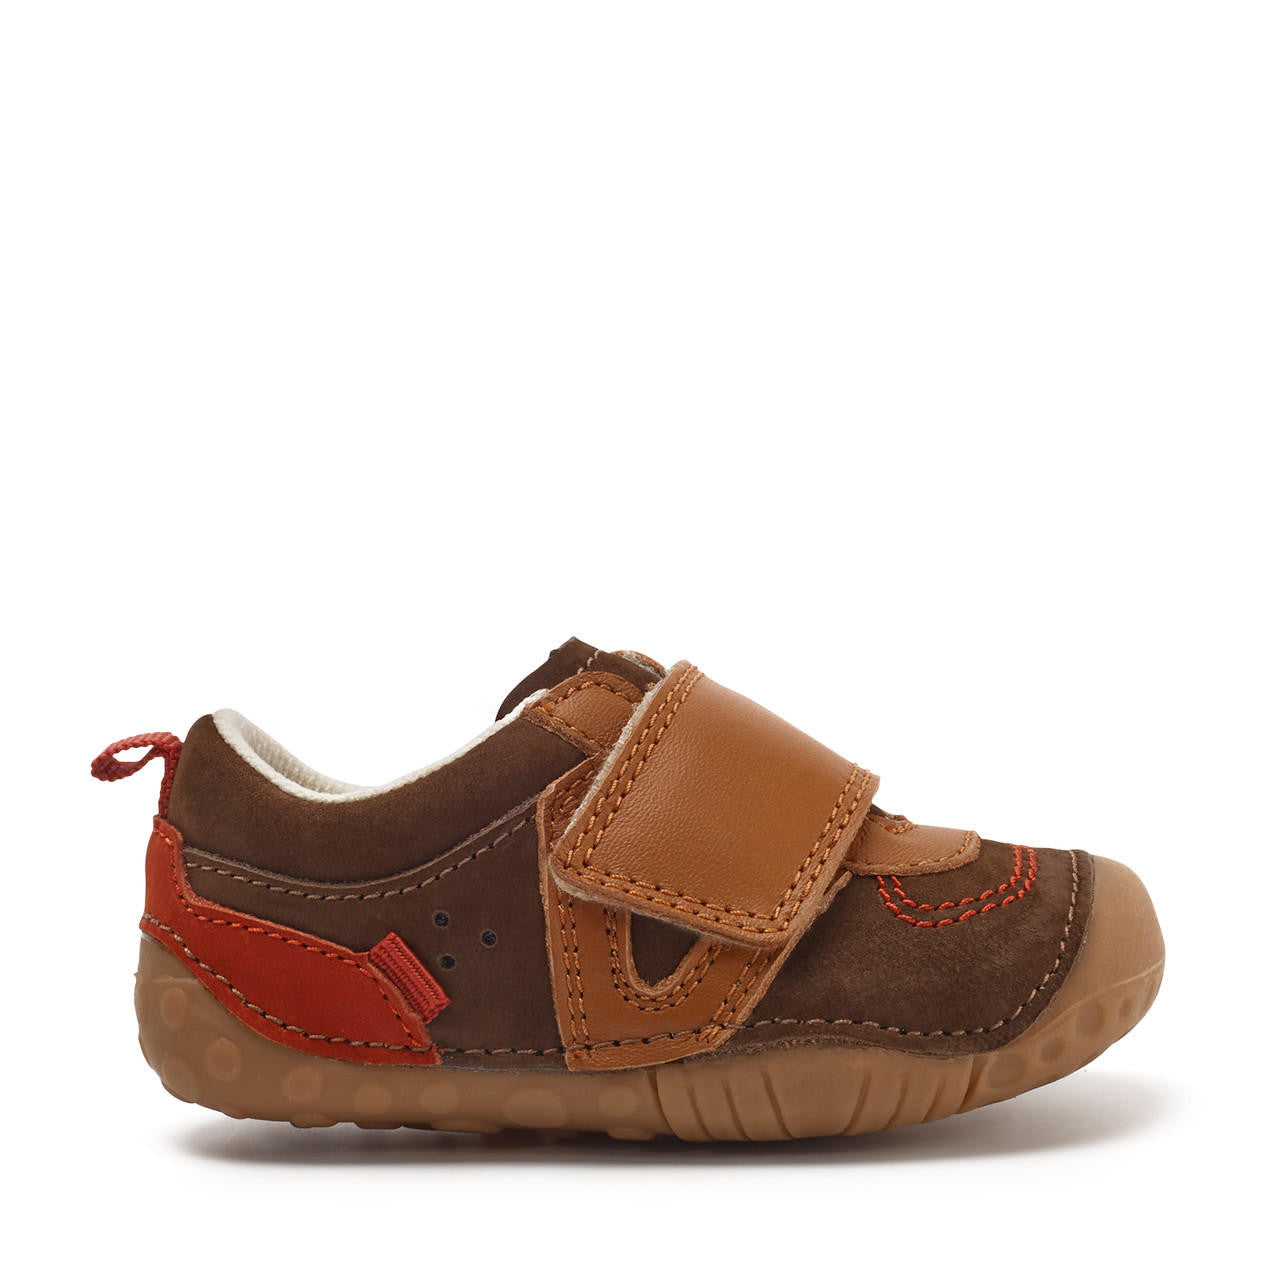 A boys pre walker by Start Rite,style Shuffle, in Brown Nubuck and Tan leather with single velcro fastening. Right side view.